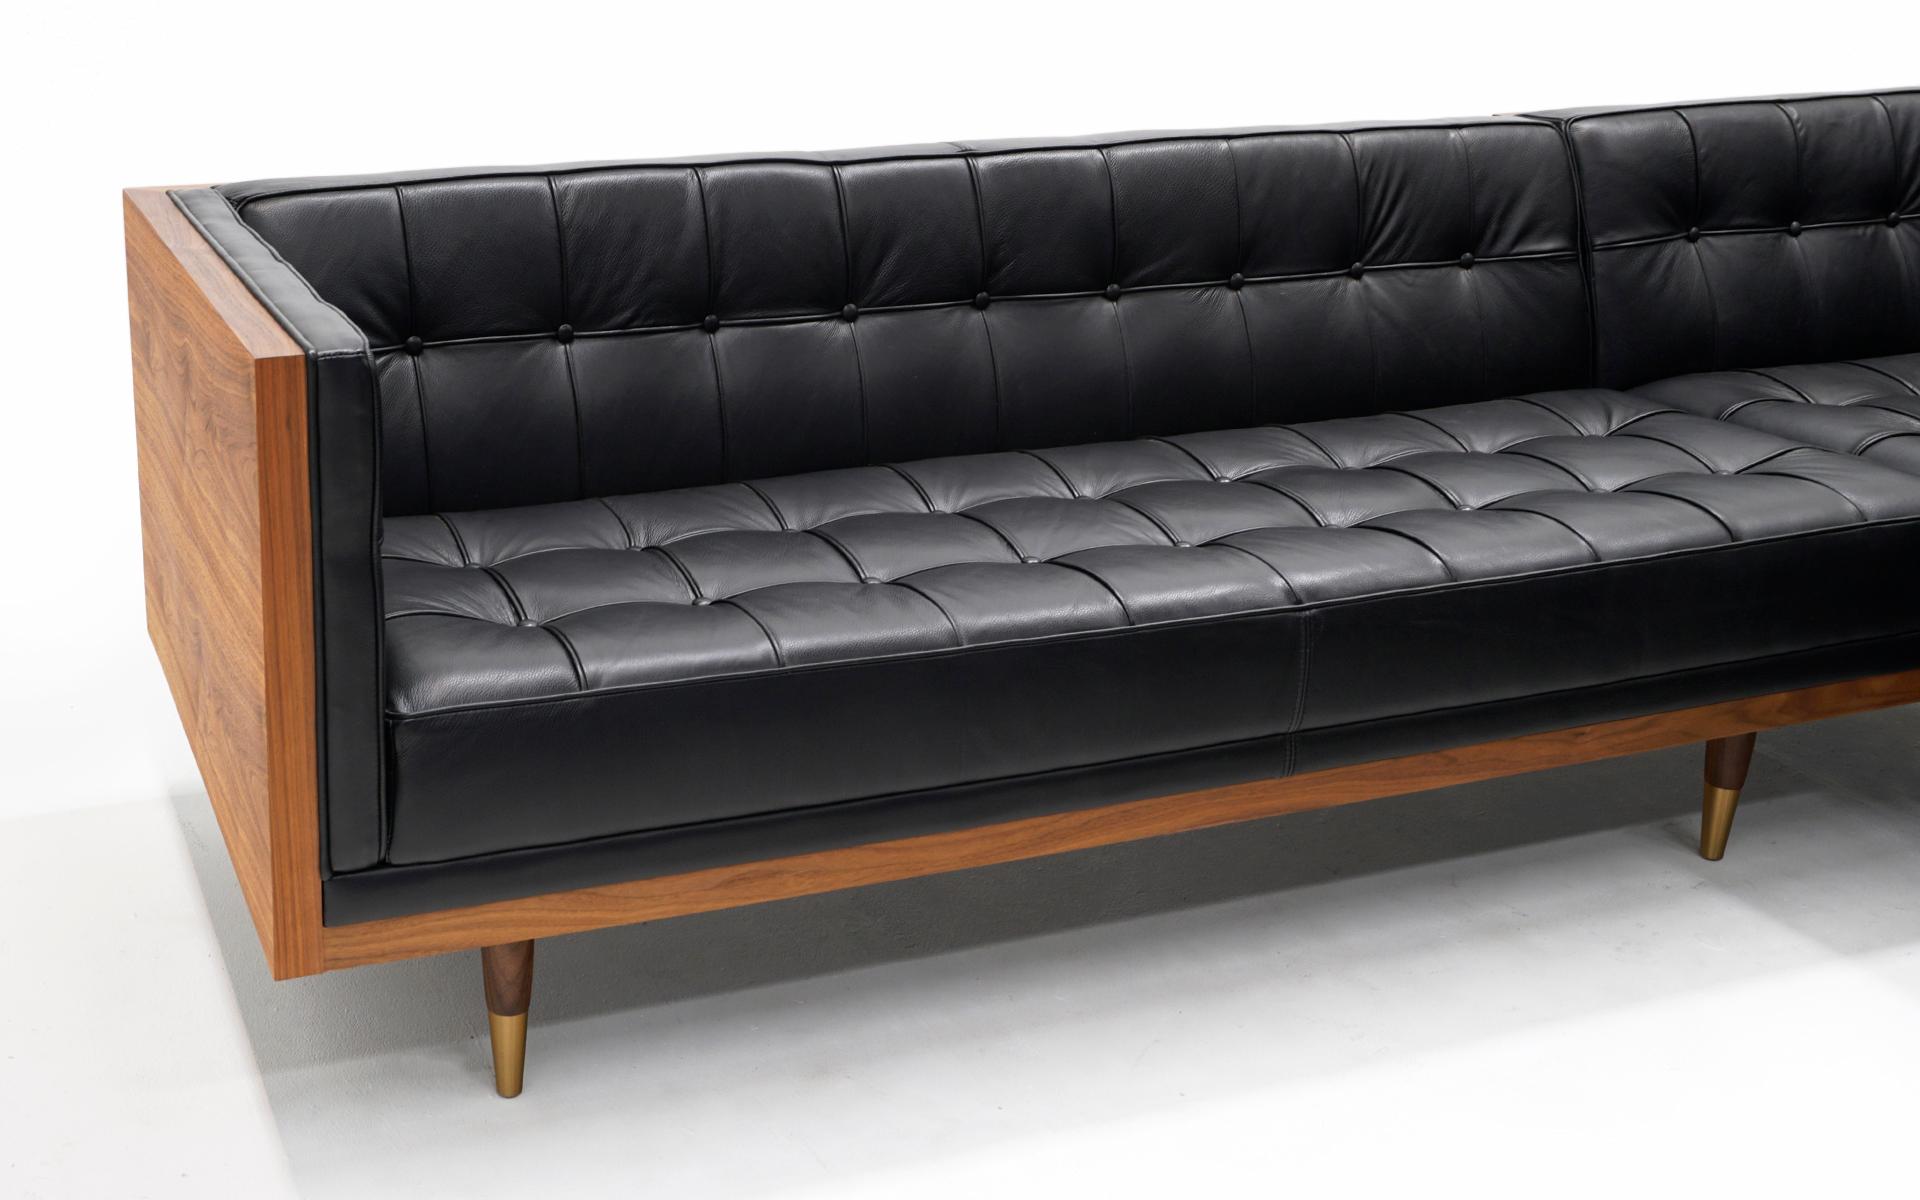 Mid-Century Modern Case Sofa Sectional with Chaise in Black Leather and Walnut by Kardiel